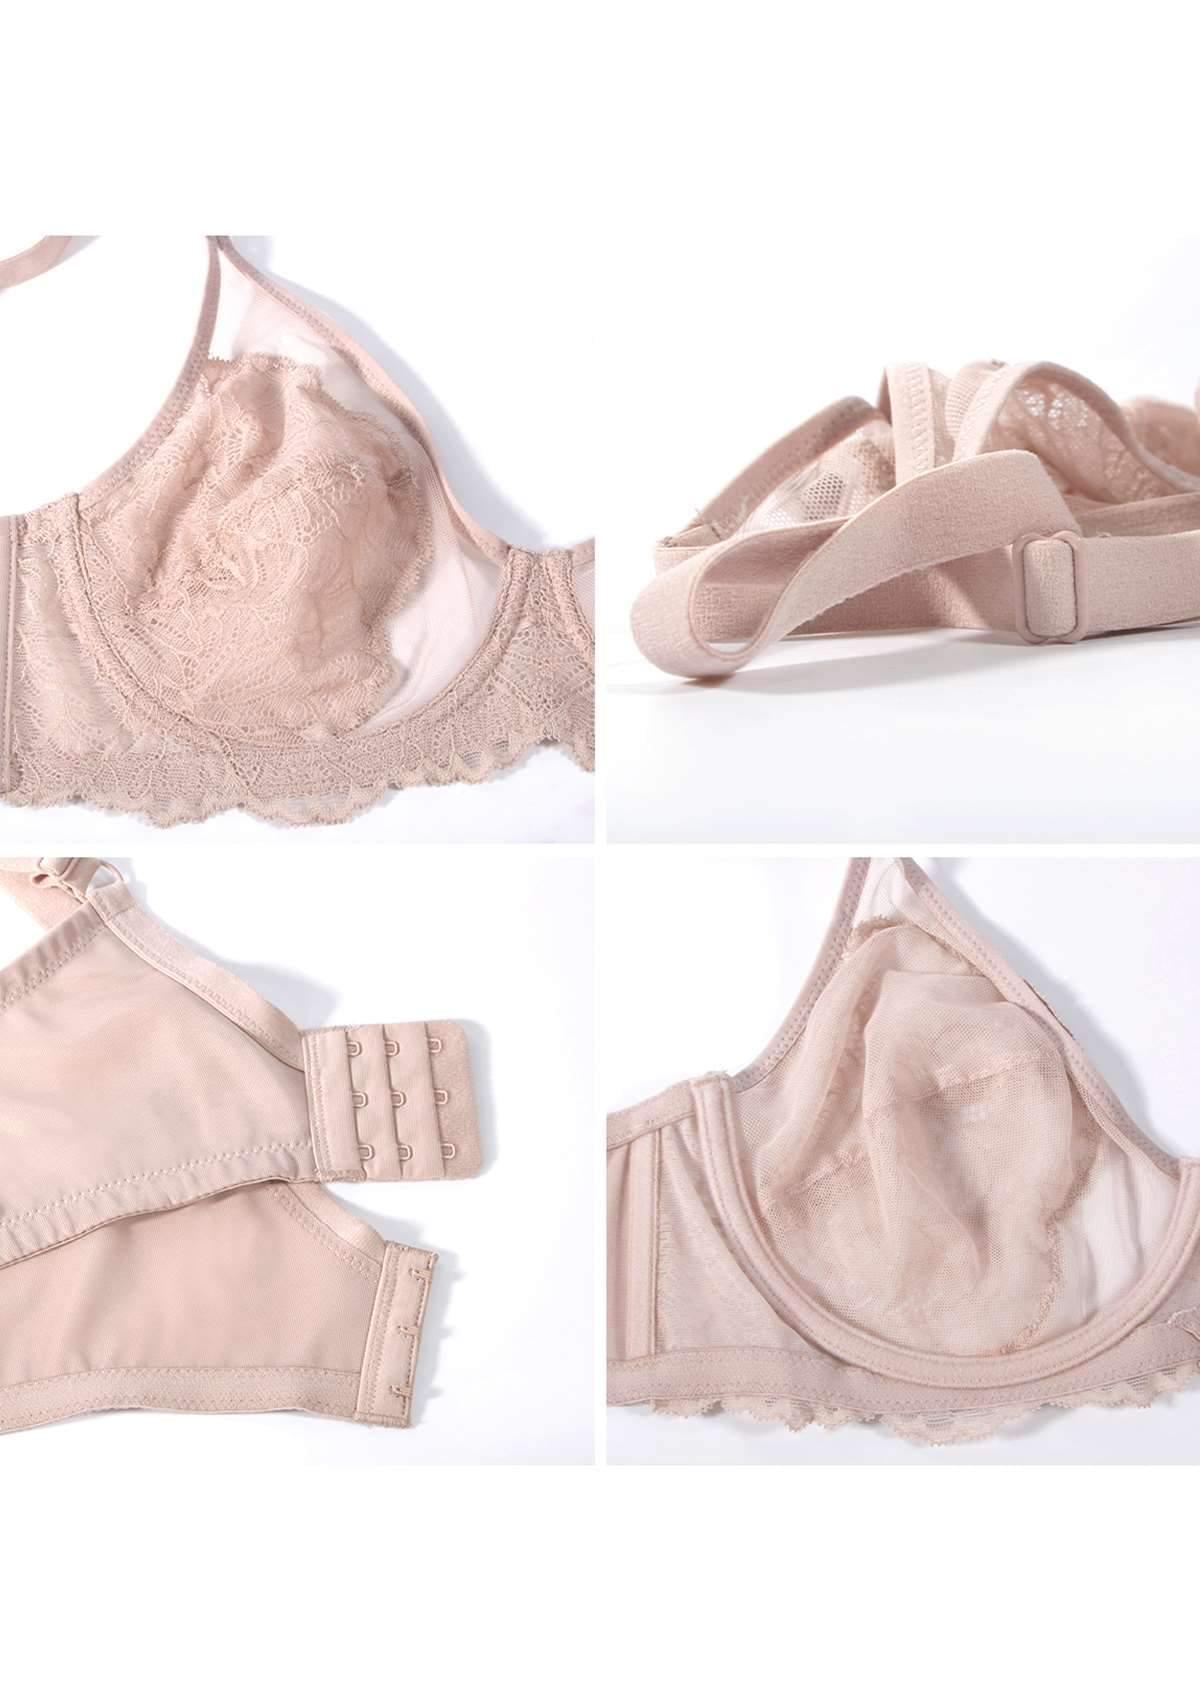 HSIA Blossom Lace Bra And Panties Set: Best Bra For Large Busts - Dark Pink / 42 / DD/E